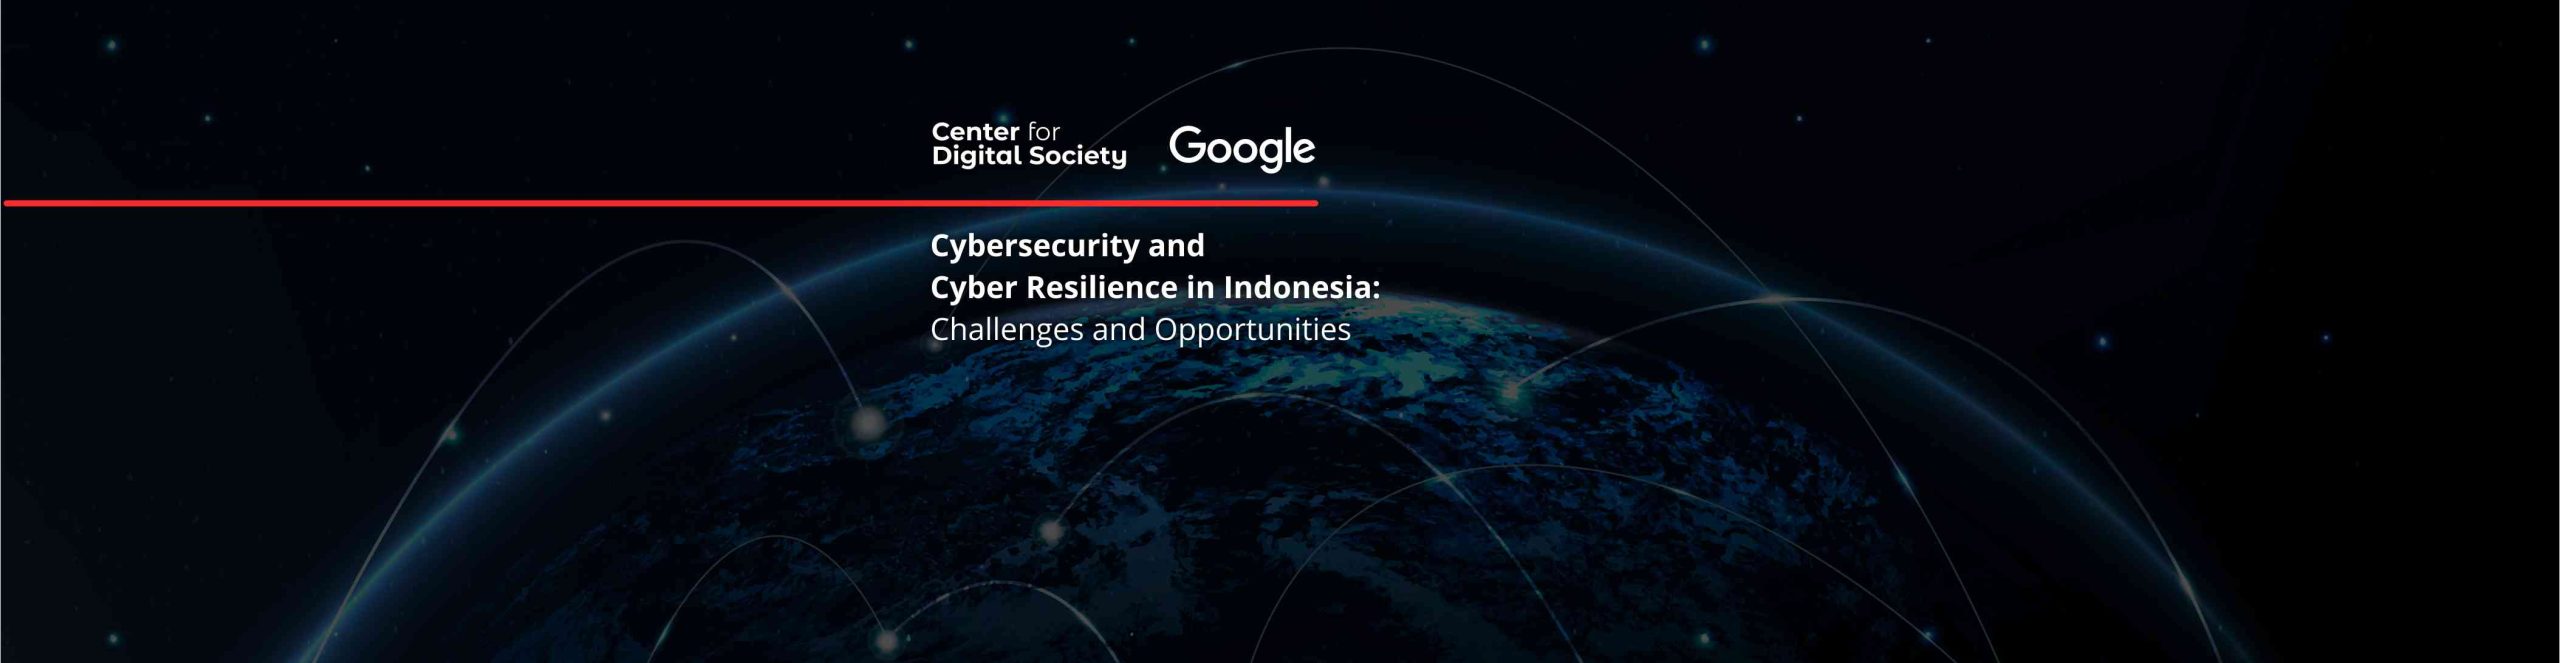 Cybersecurity and Cyber Resilience in Indonesia: Challenges and Opportunities